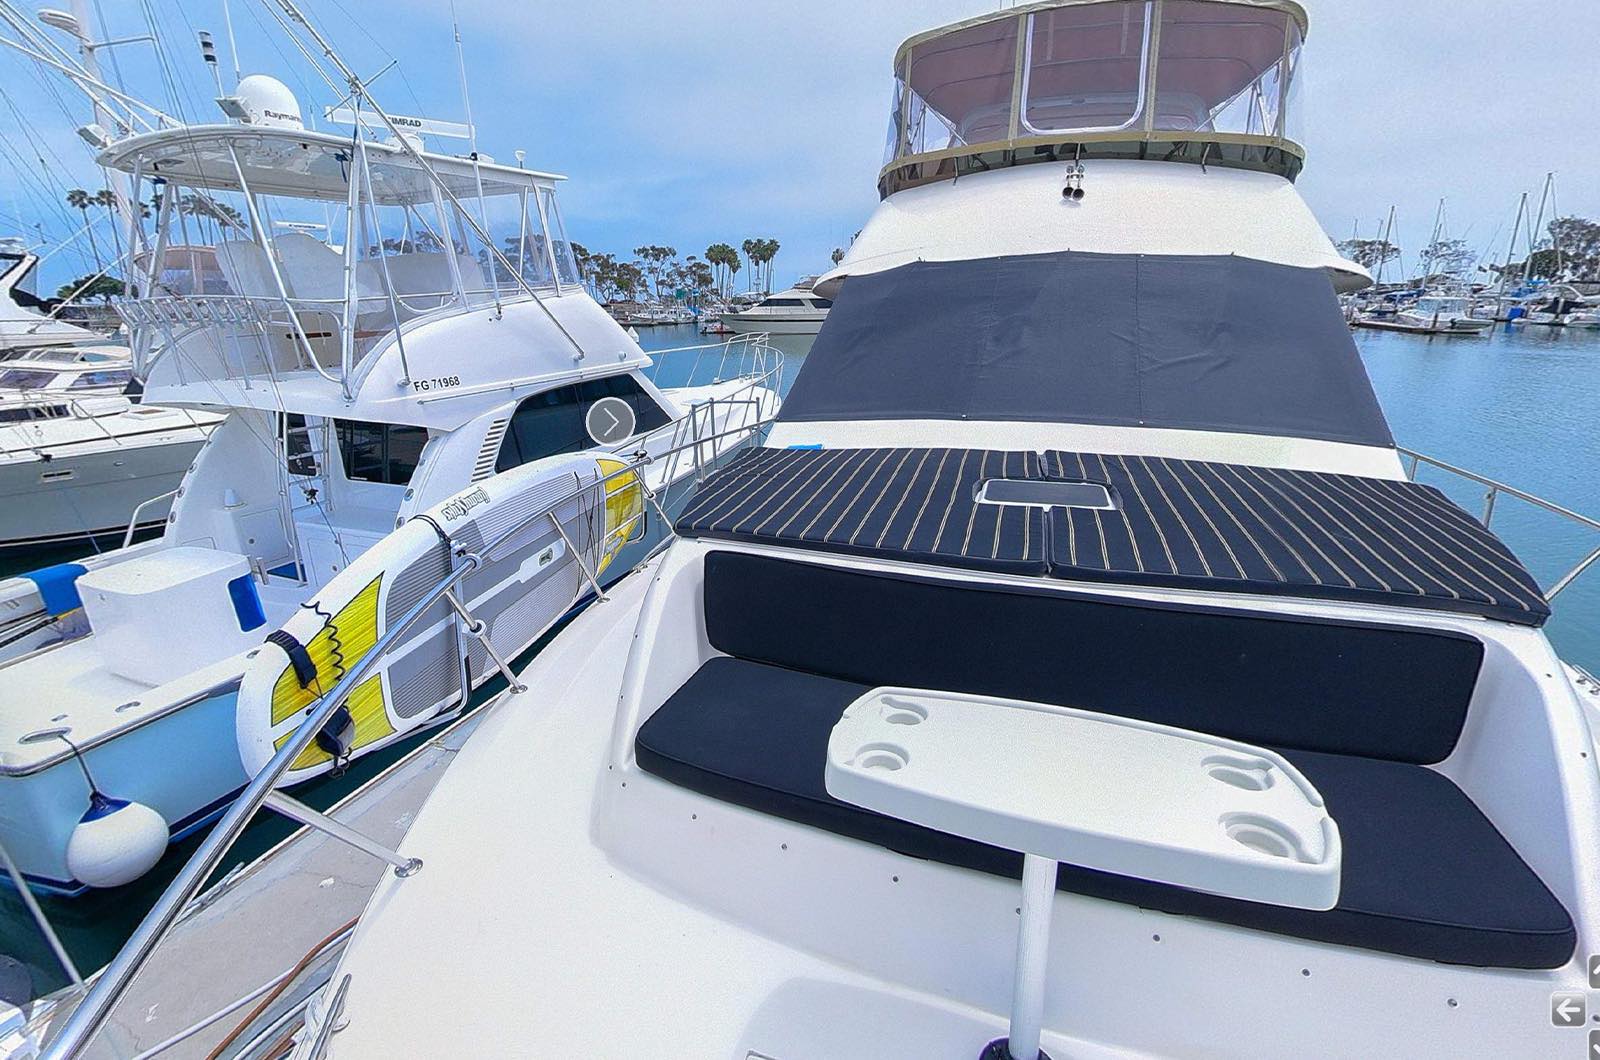 360 Virtual Tours For Yachts